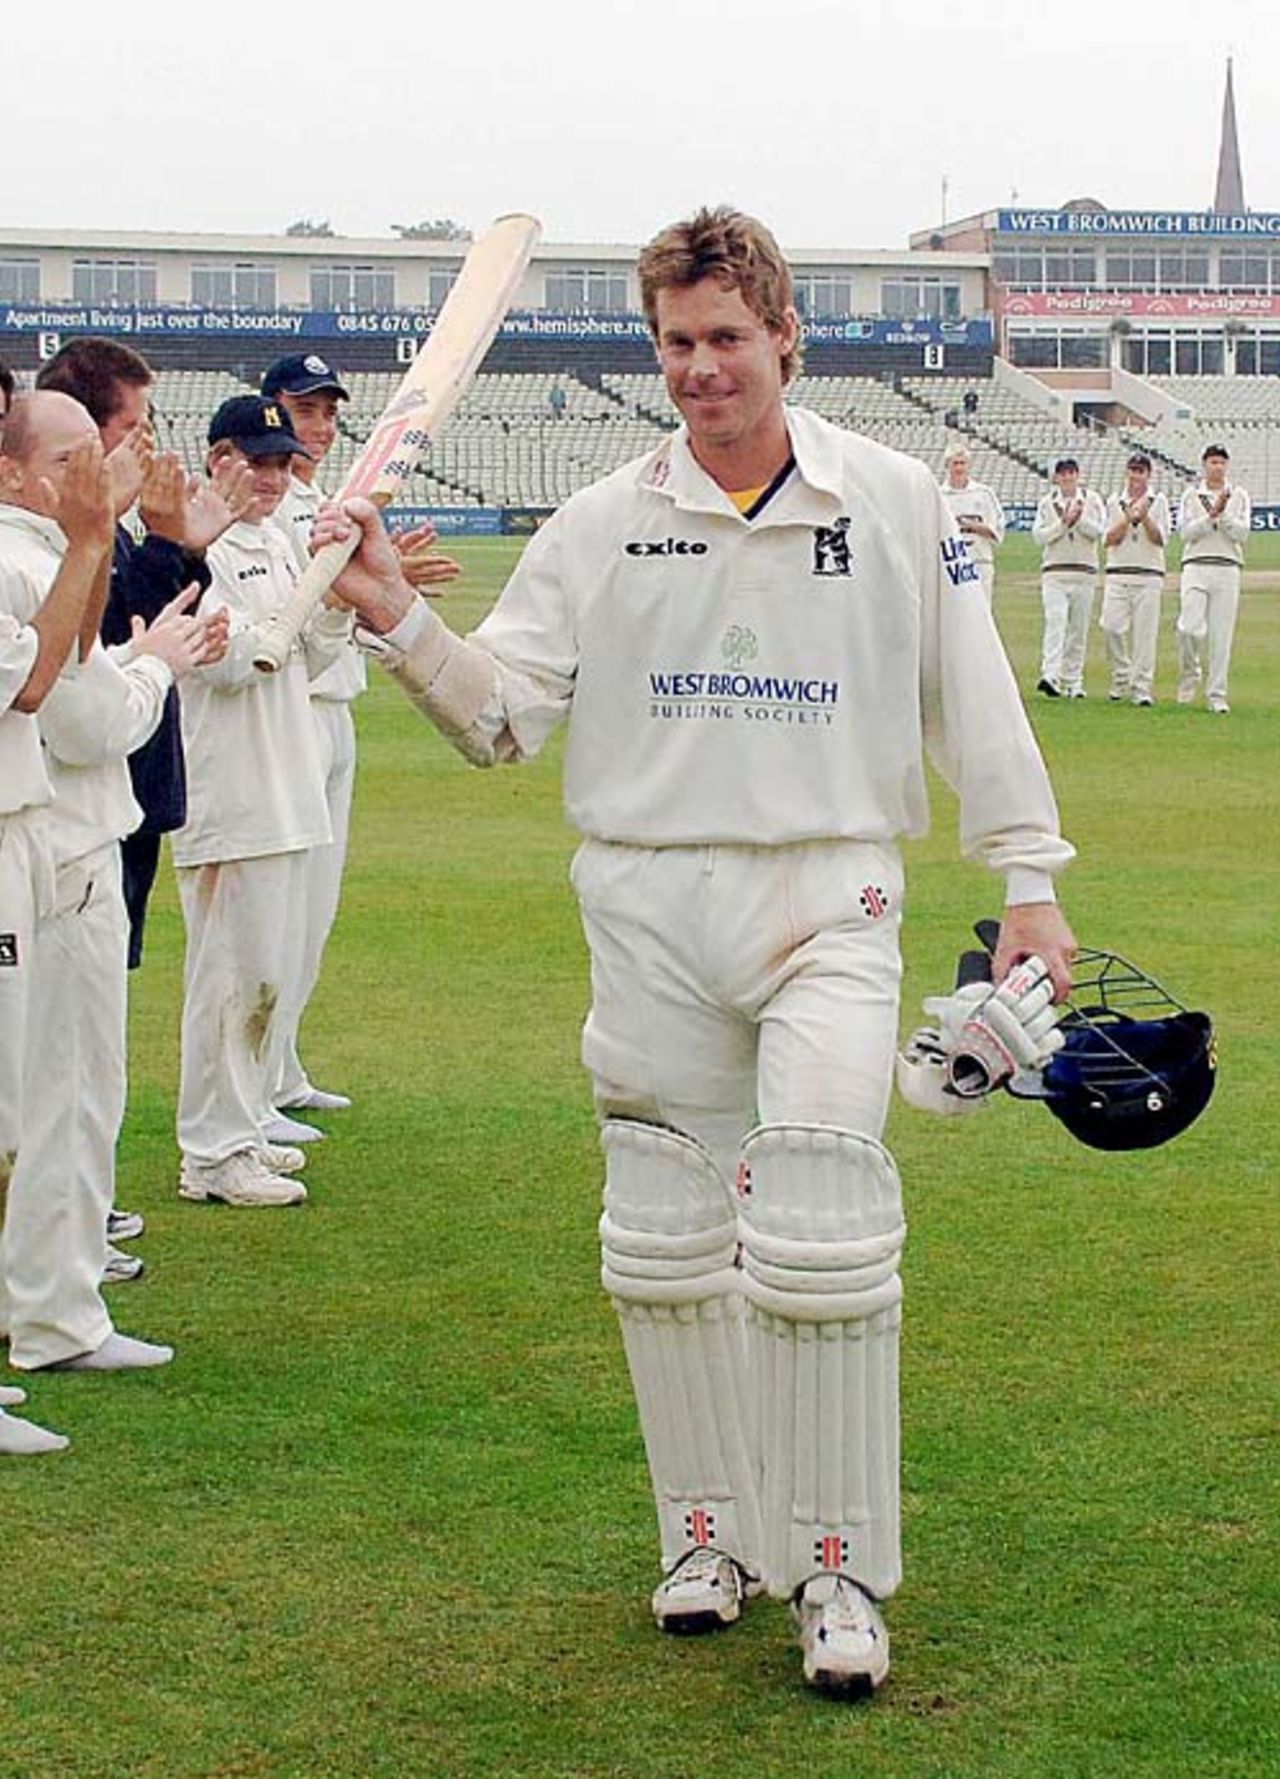 Nick Knight leaves the field for the final time, Warwickshire v Kent, Edgbaston, September 16, 2006